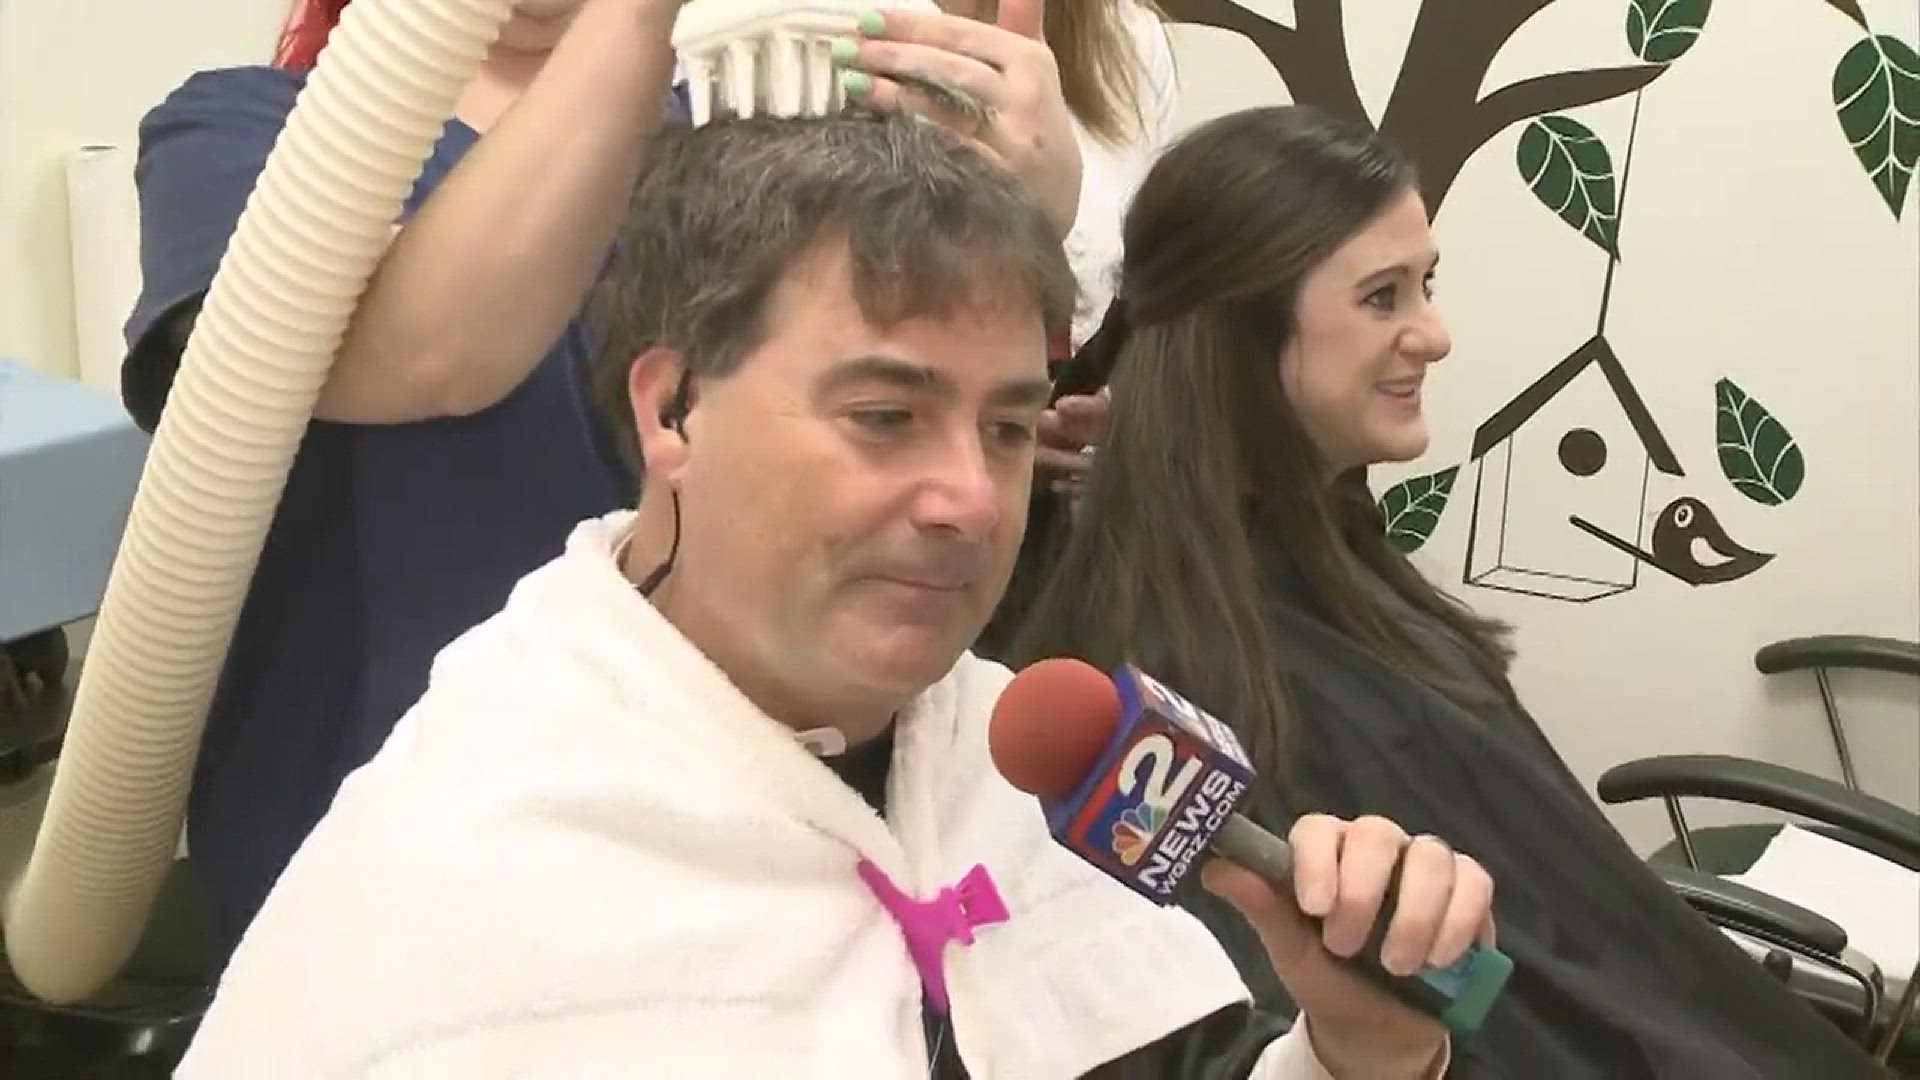 Daybreak's Kevin O'Neill celebrates WNY at Naughty Nits, and gets checked for lice.